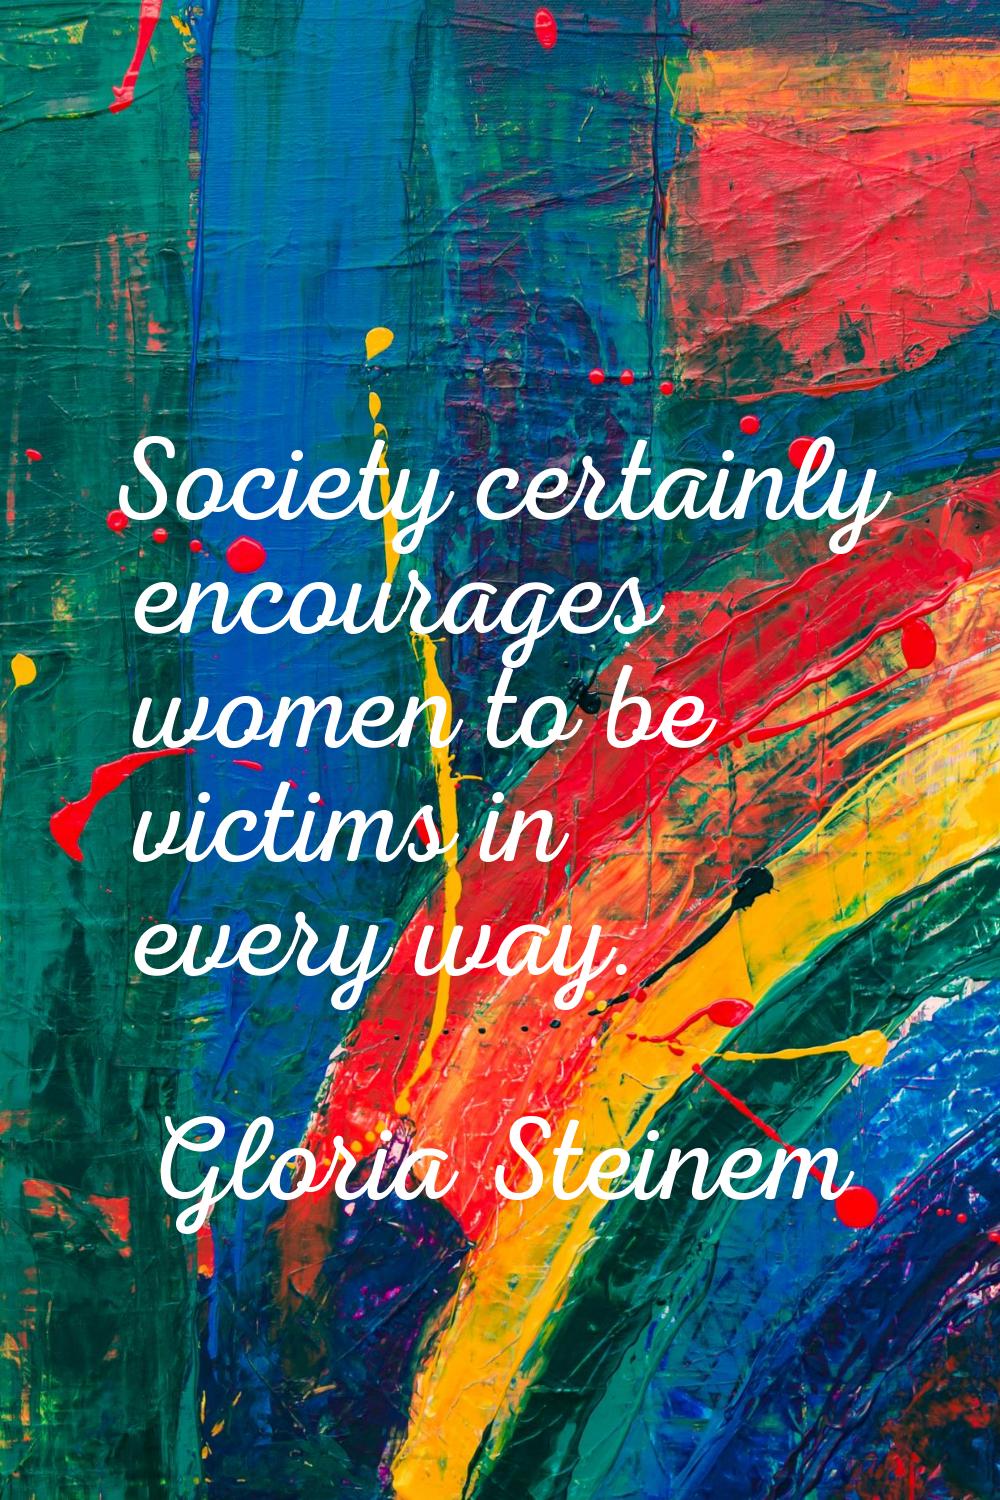 Society certainly encourages women to be victims in every way.